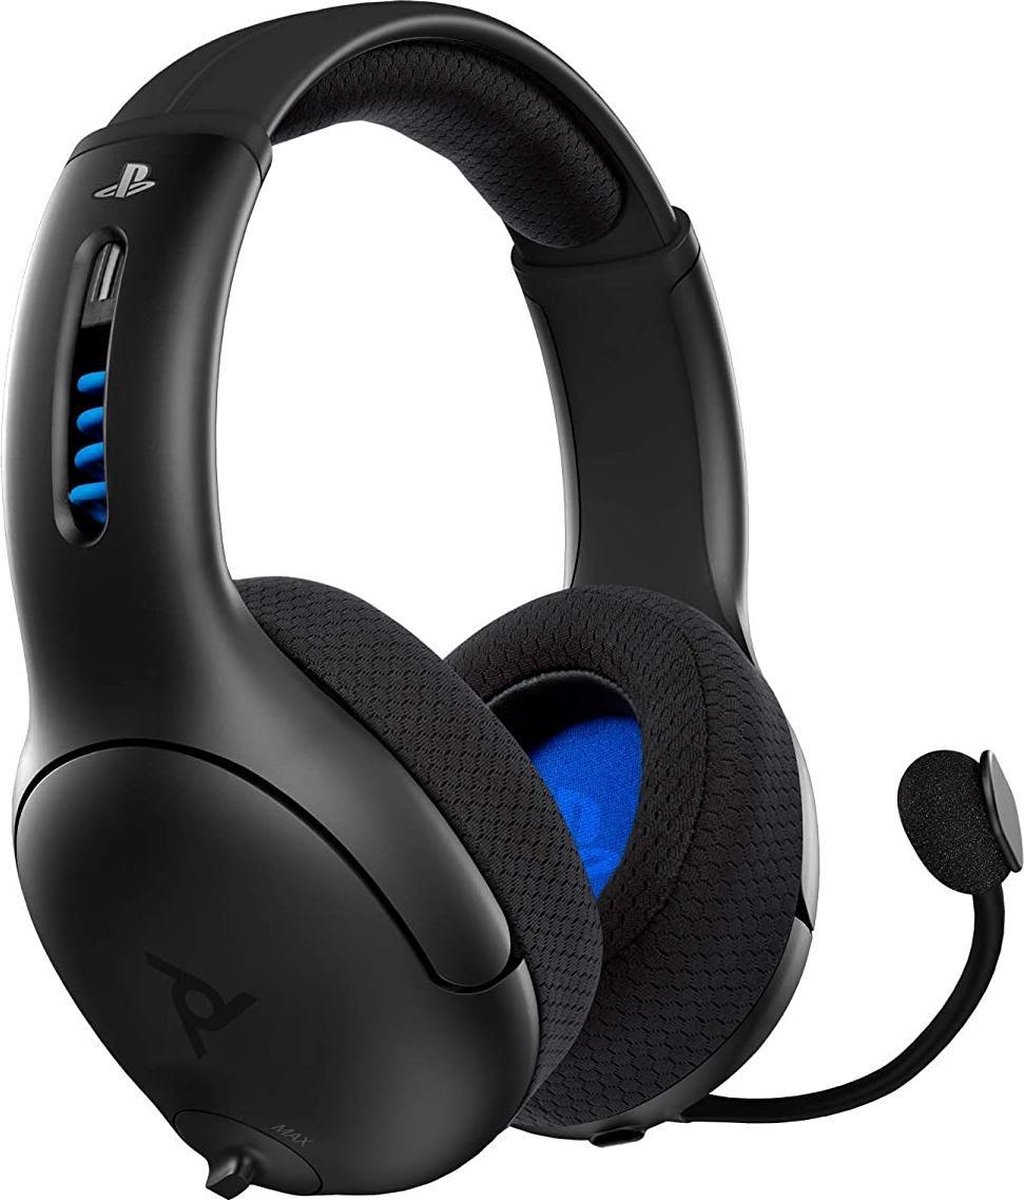 sony playstation 5 headset reviews